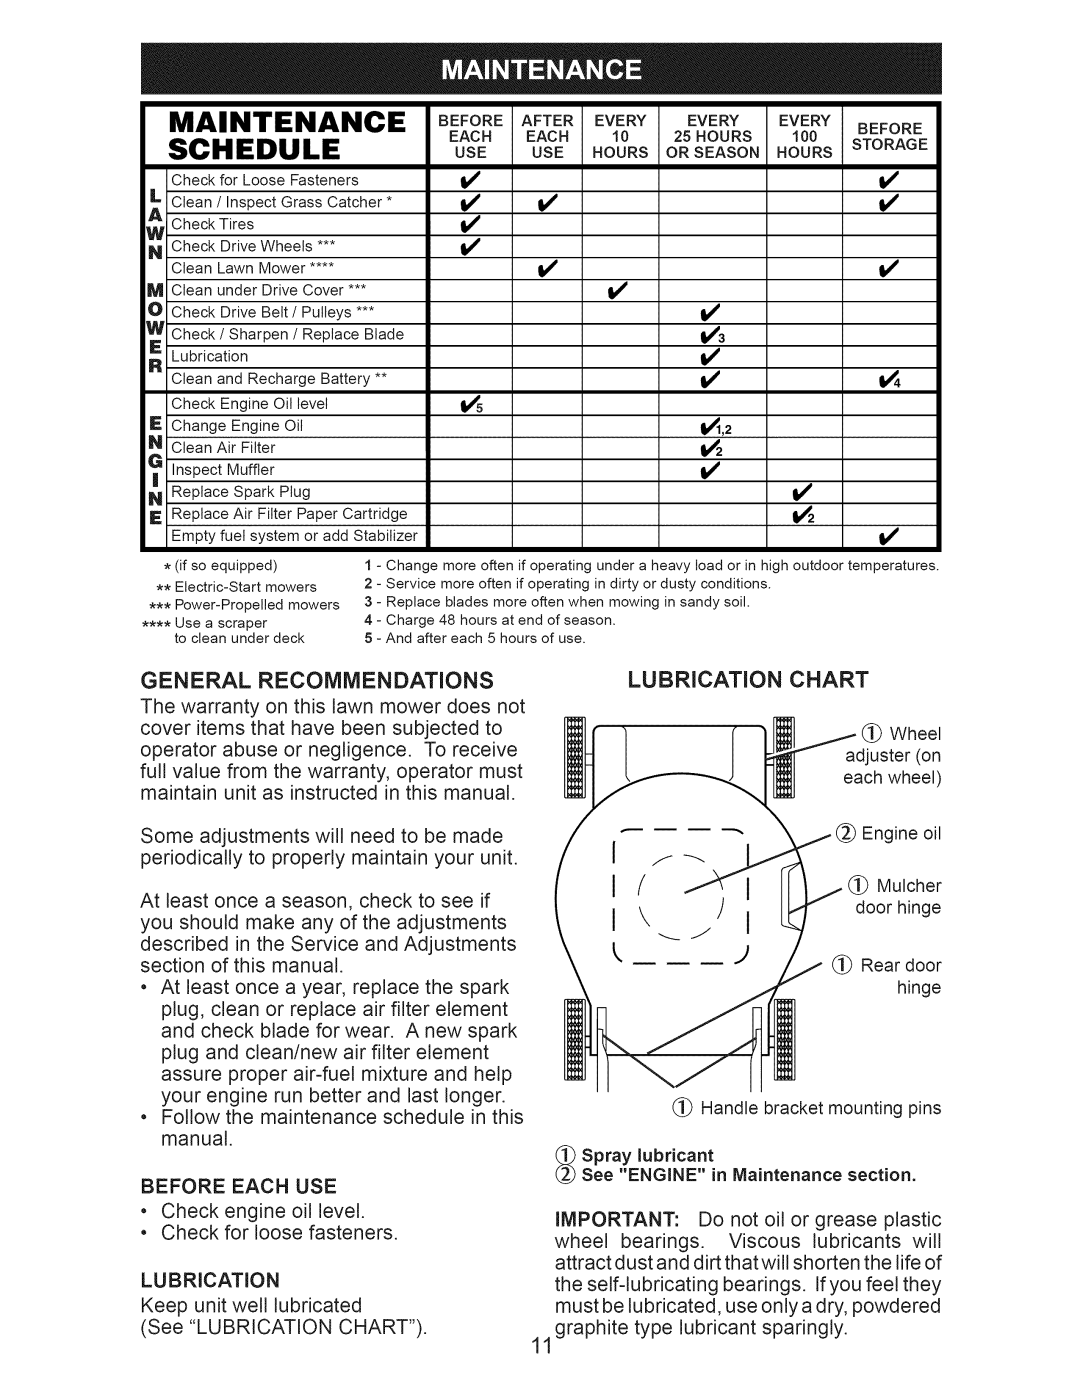 Craftsman 917.388201 owner manual Maintenance, Schedule, Use Hours 